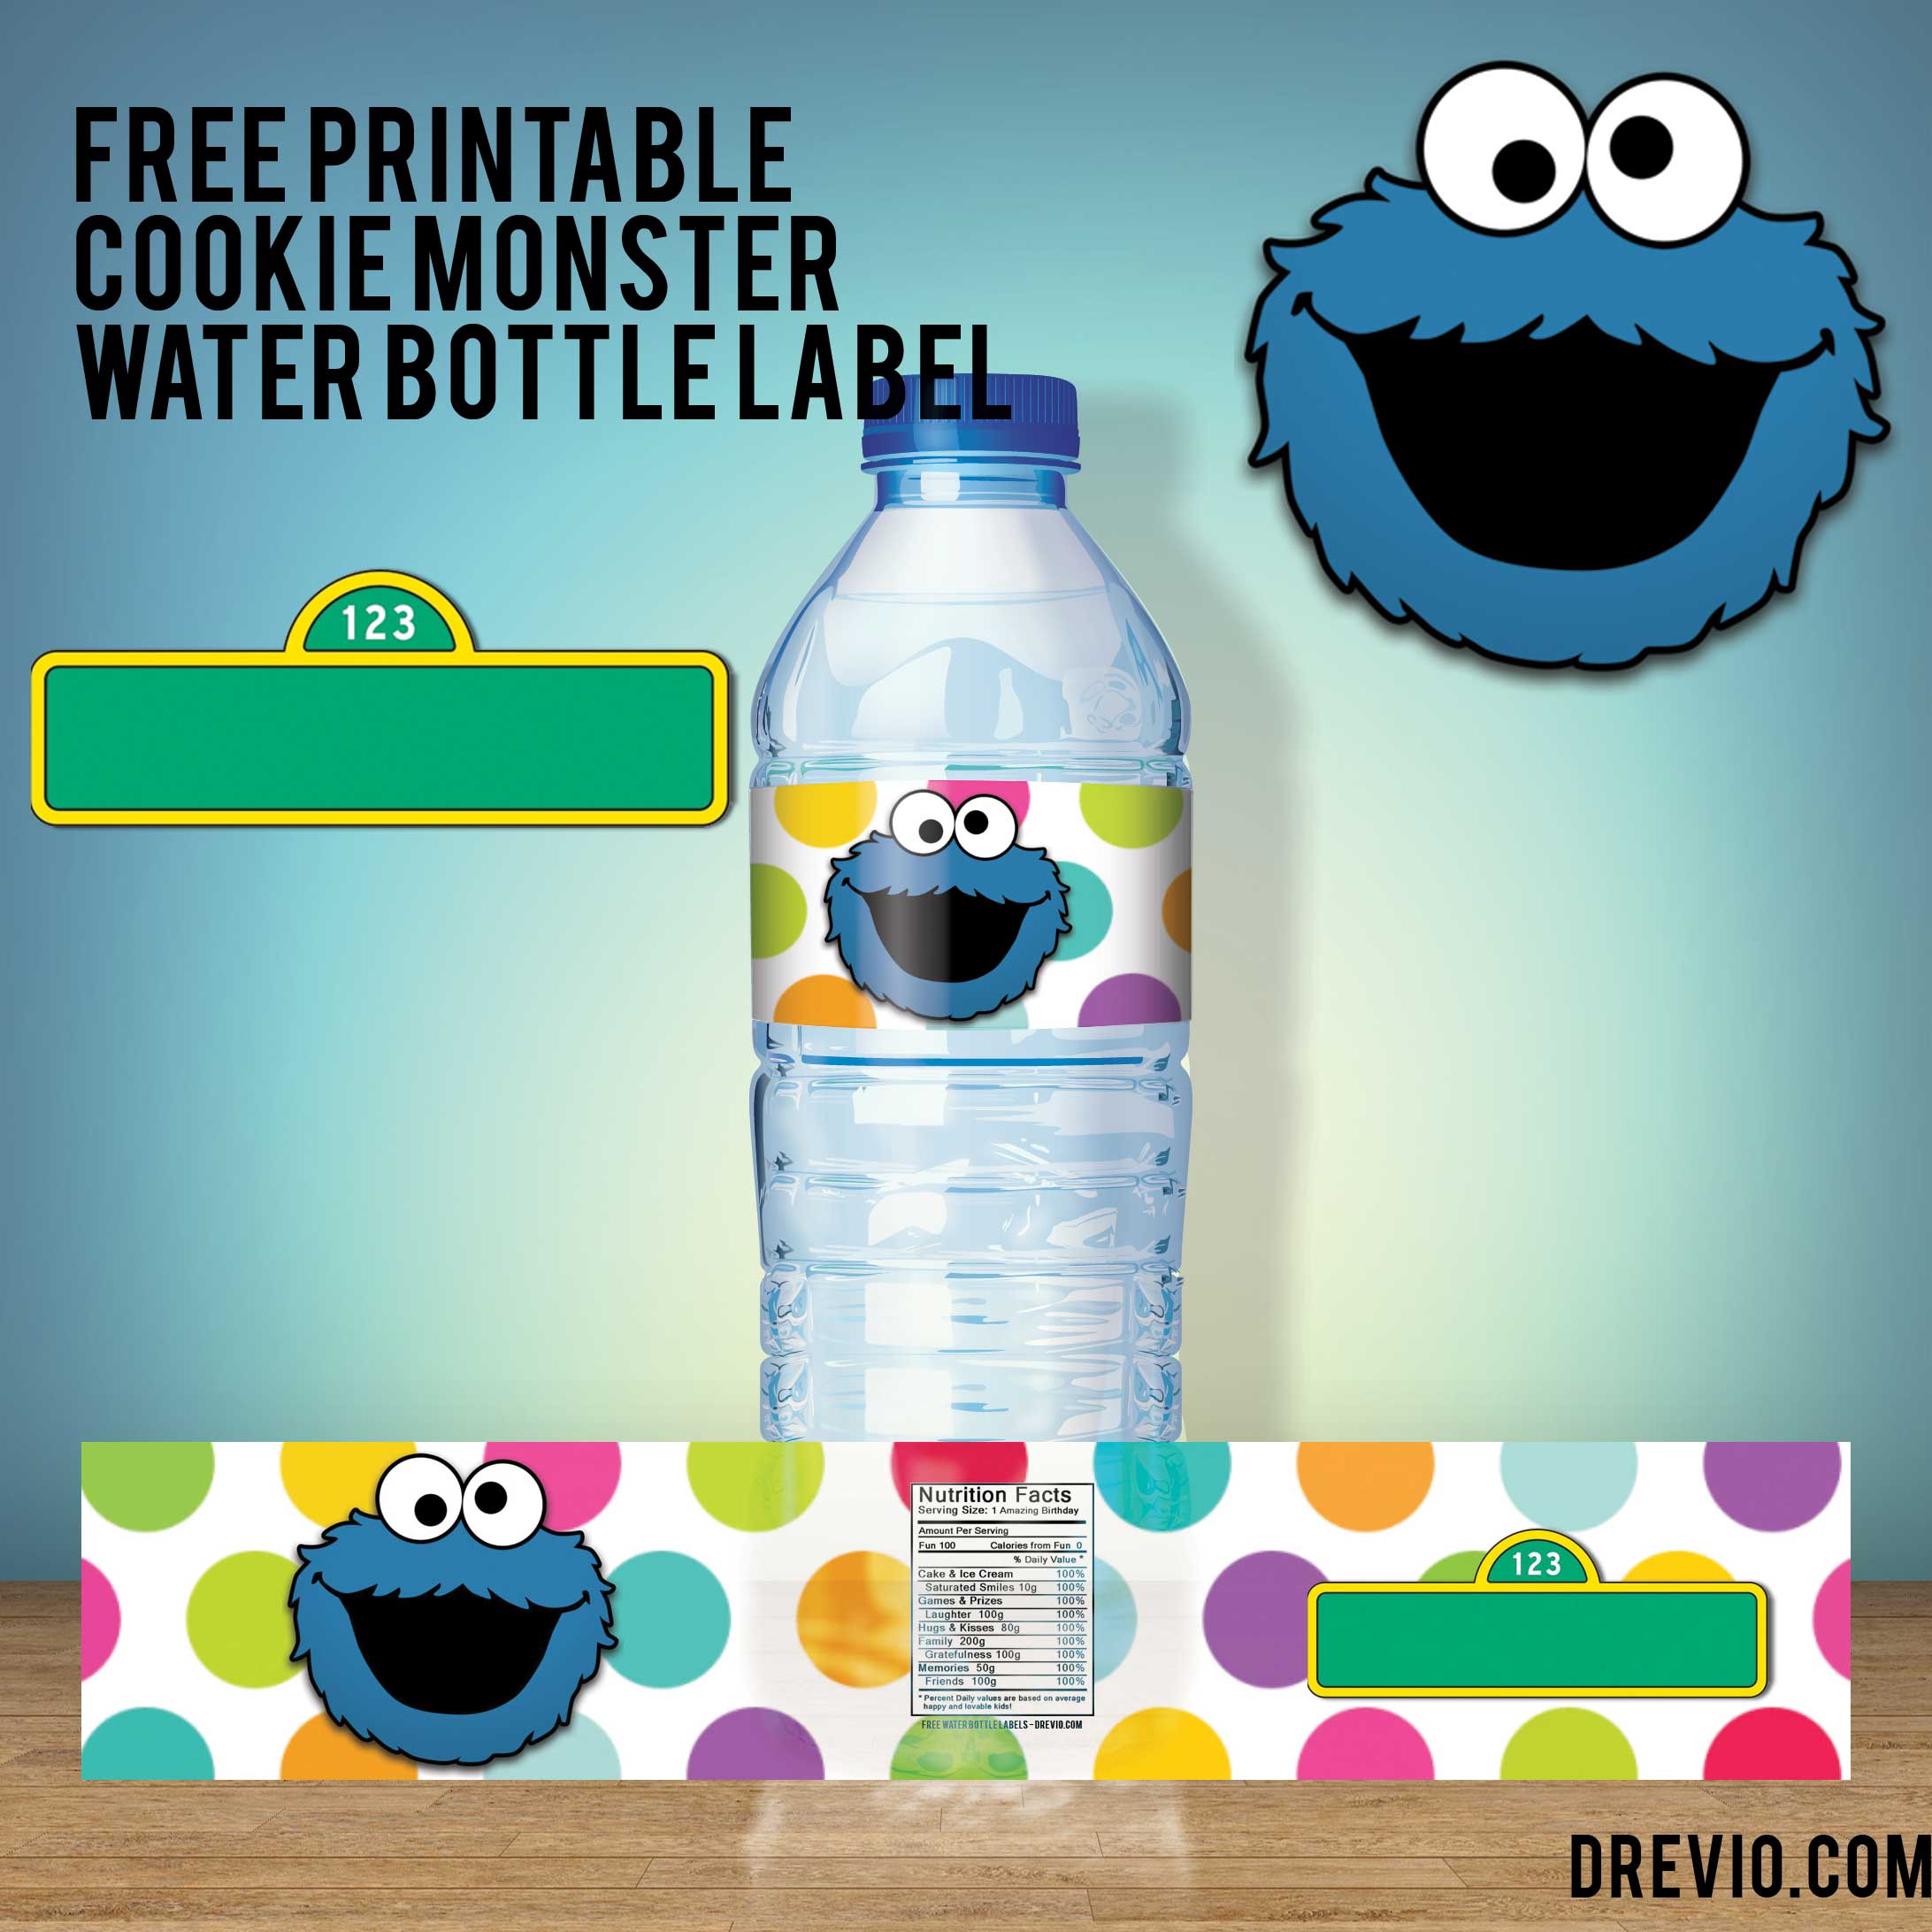 FREE-Printable-Cookie-Monster-Water-Bottle-Label-Preview